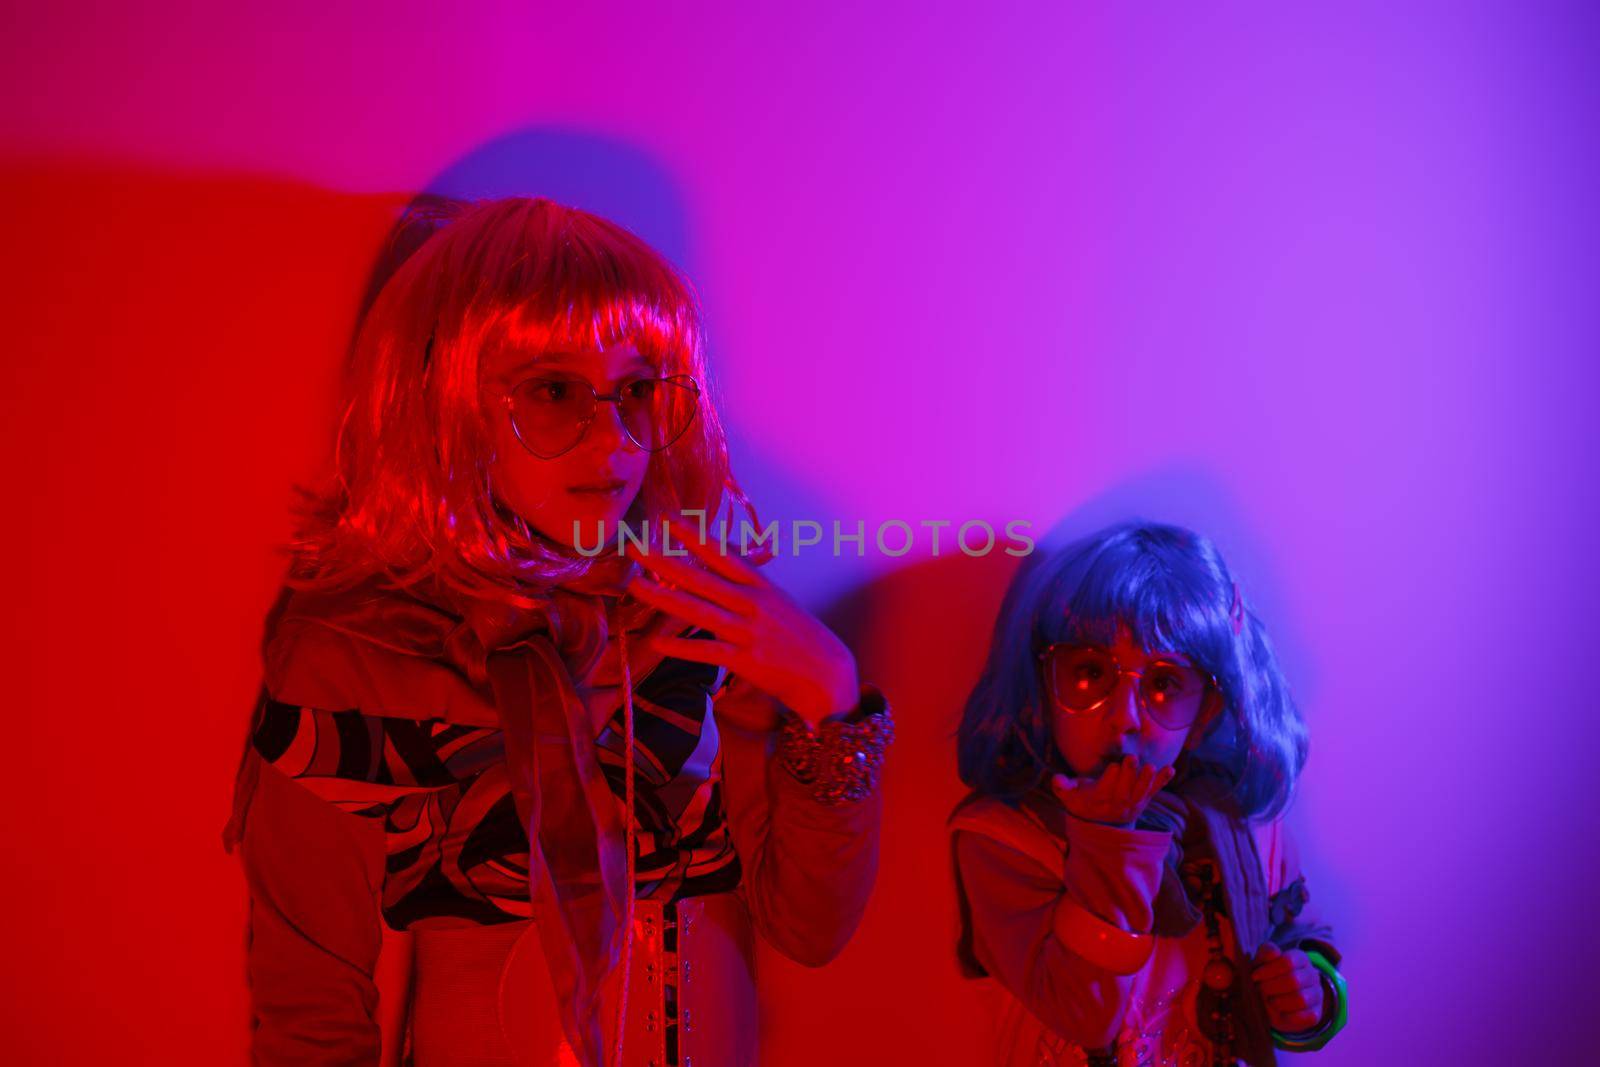 Two little girls wearing a colorful wig and heart-shaped sunglasses posed for a photo shooting by bepsimage